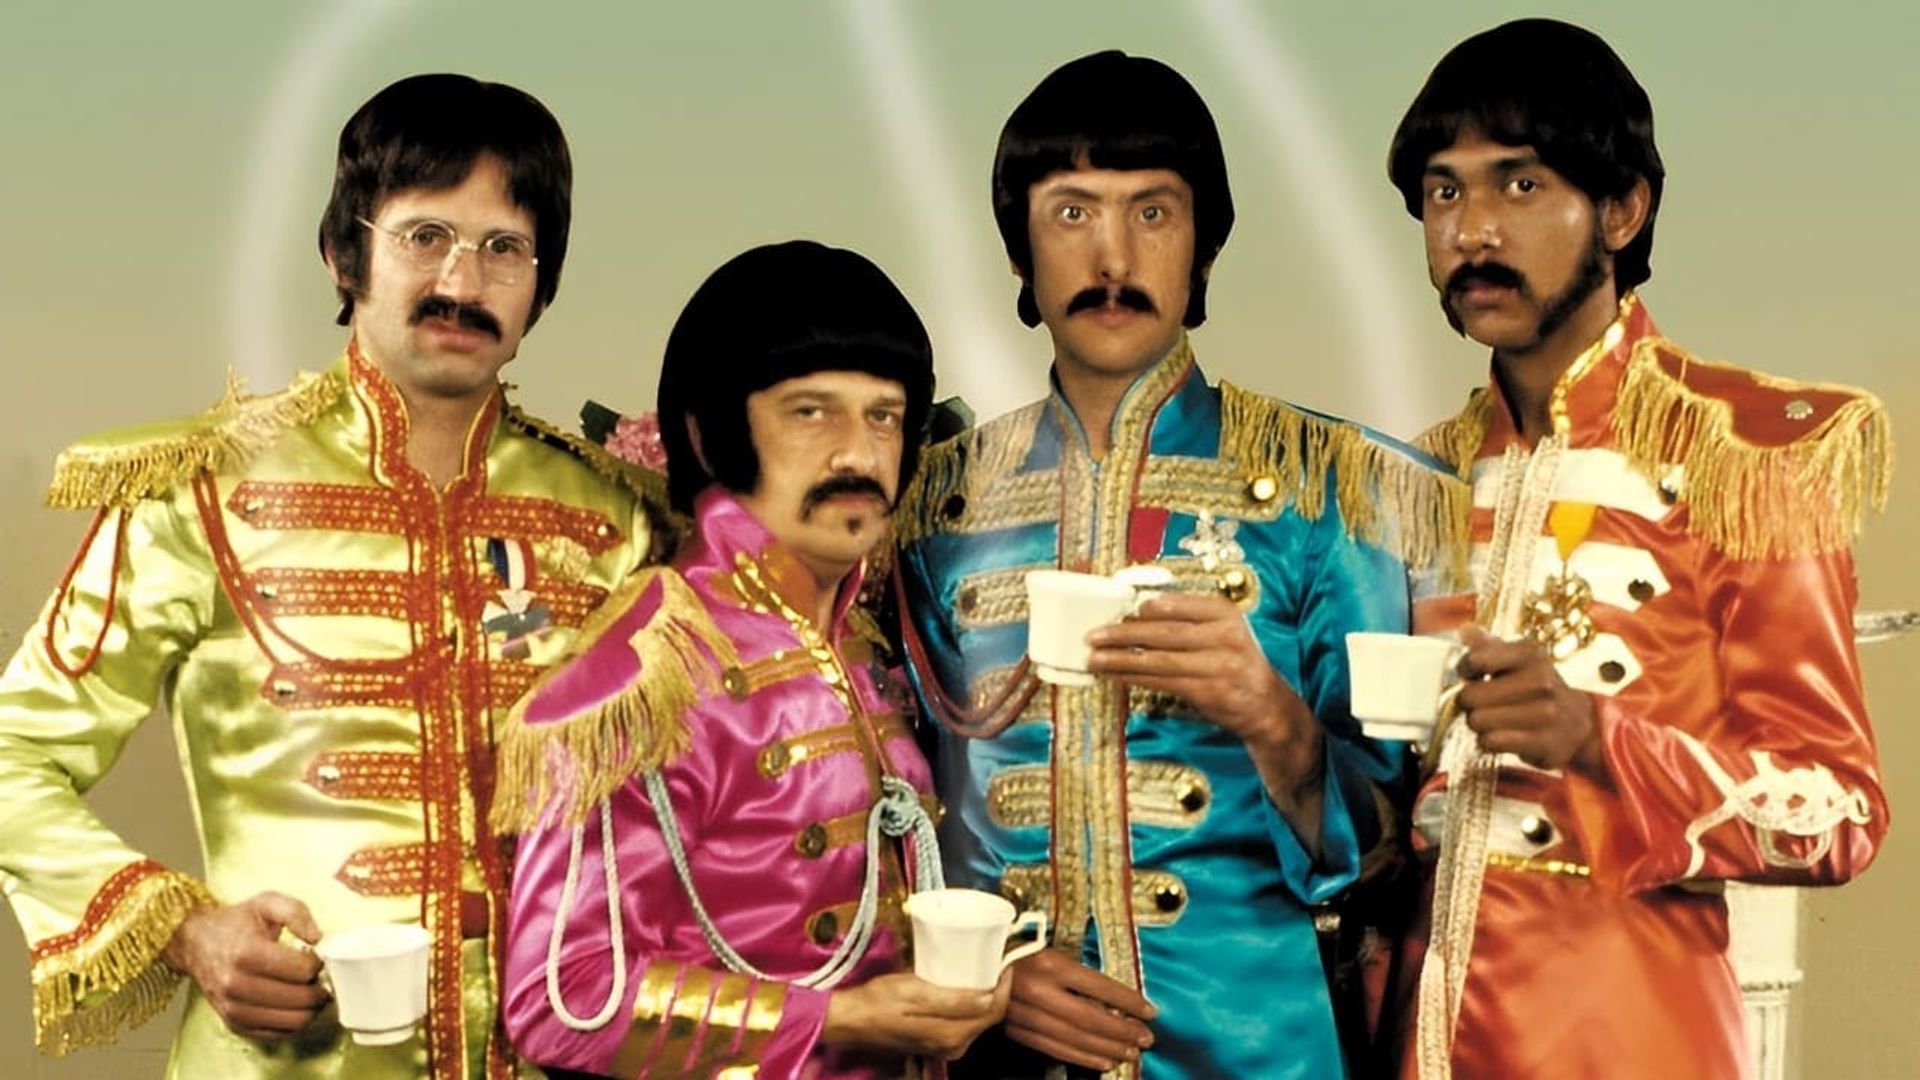 The Rutles: All You Need Is Cash background